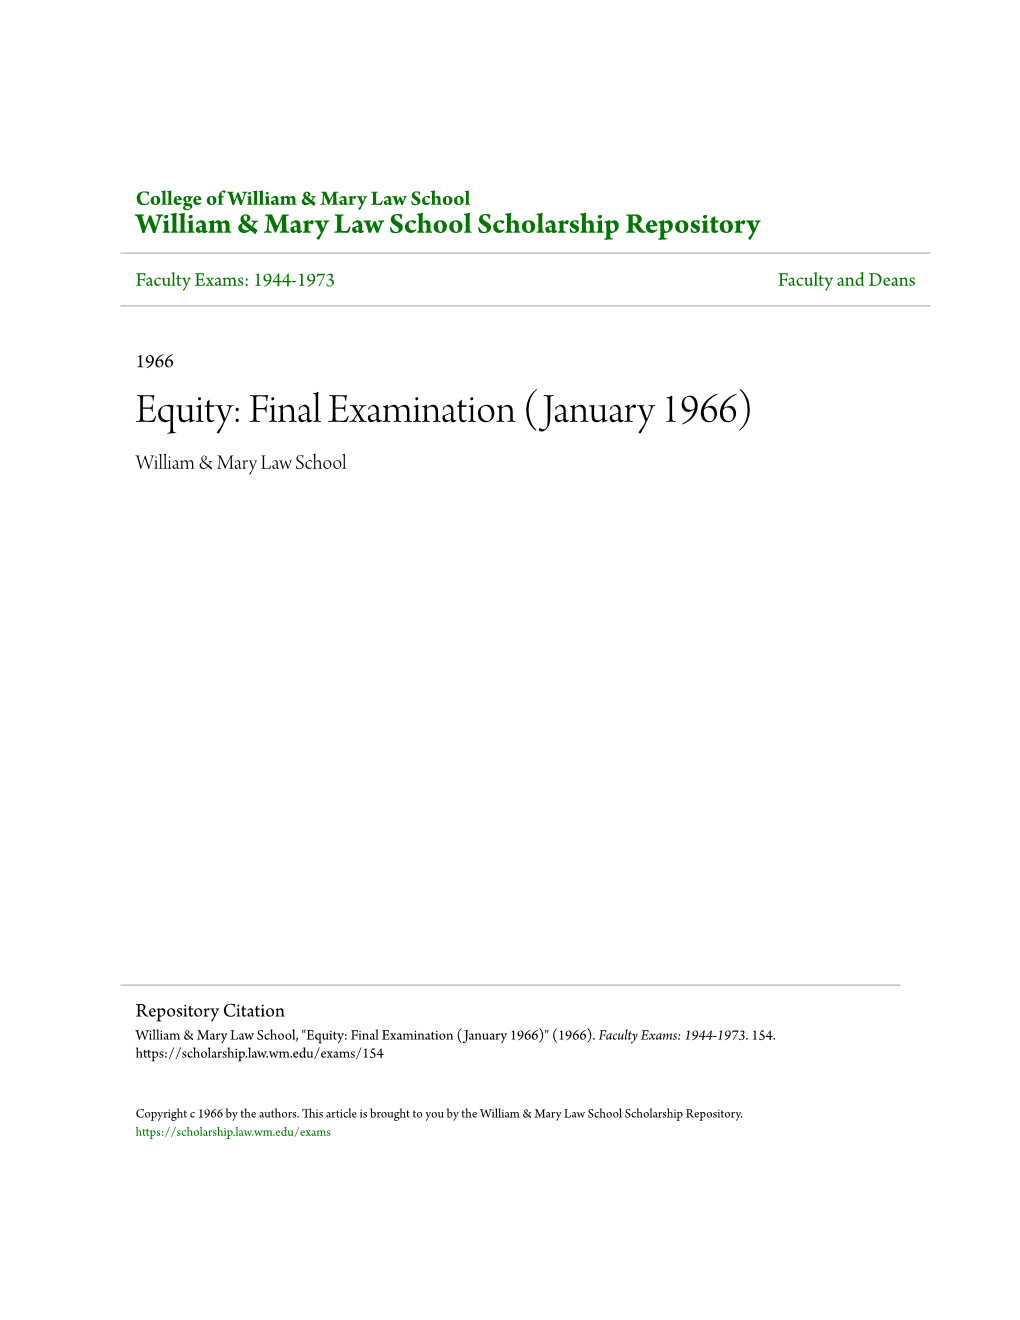 Equity: Final Examination (January 1966) William & Mary Law School